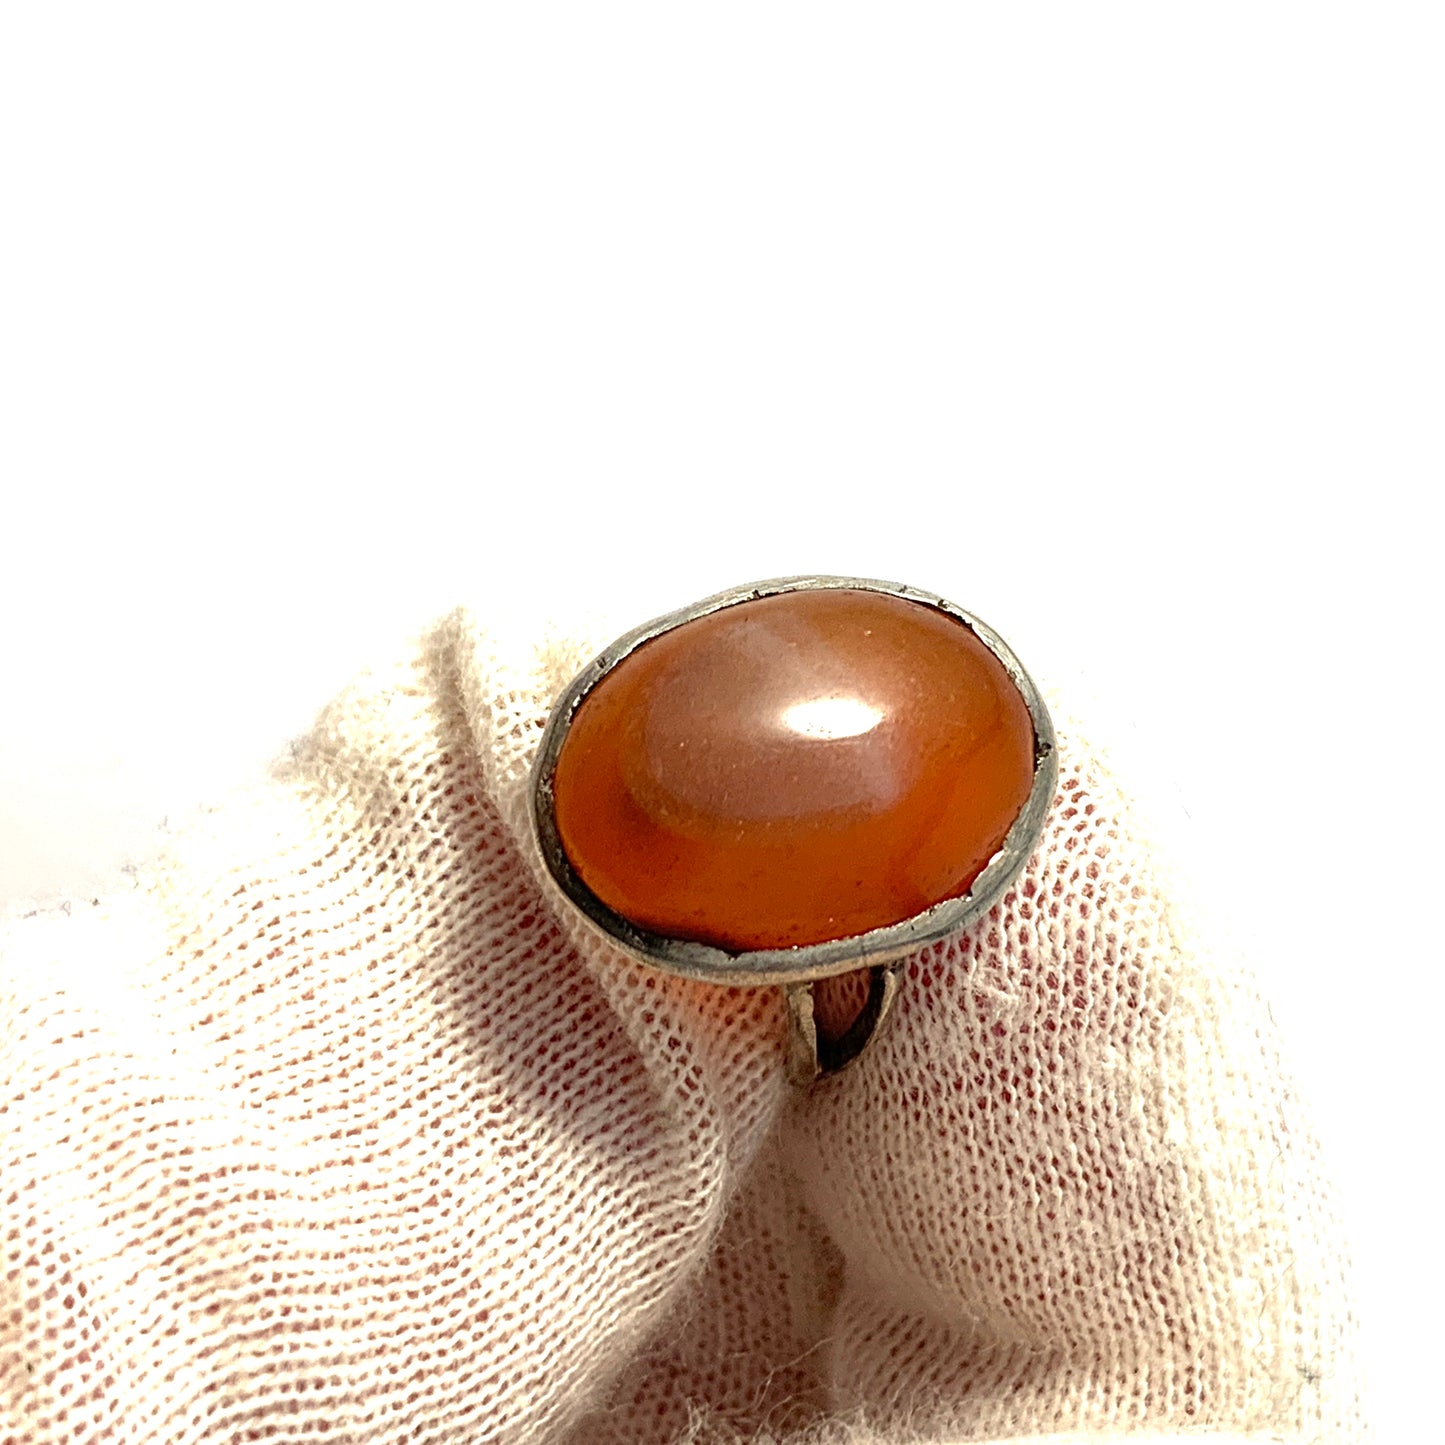 Scandinavia Early to Mid 1800s Antique Solid Silver Carnelian Ring.